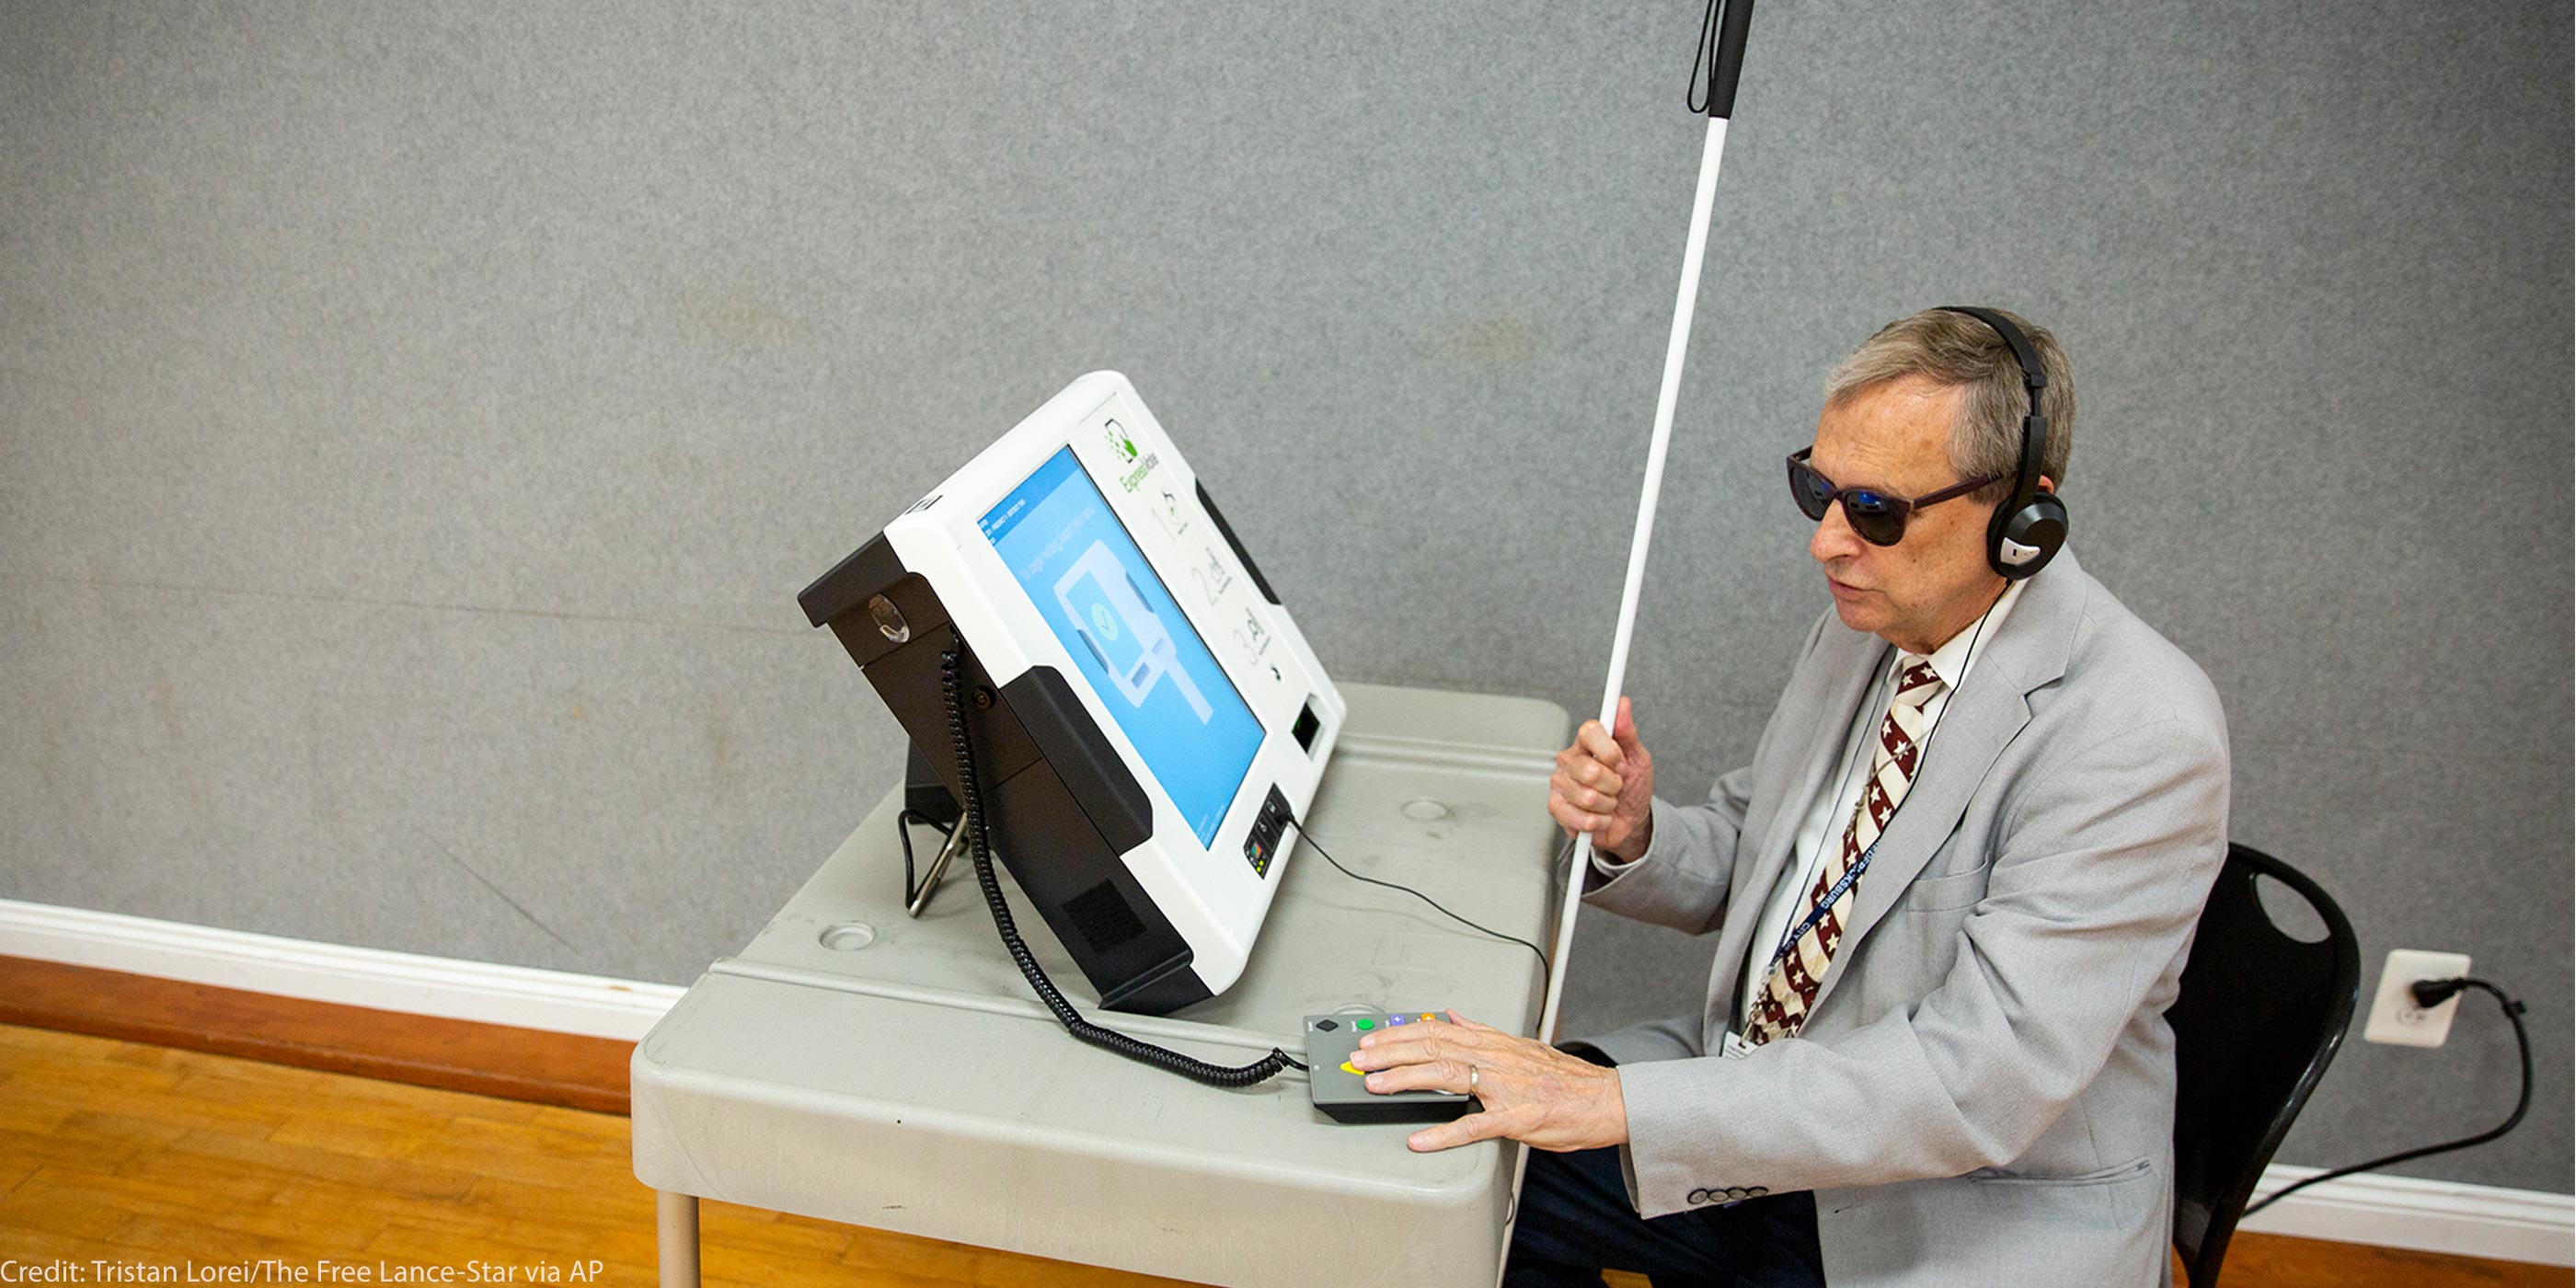 Michael Kasey, who is blind, demonstrates a voting machine that allows people with disabilities to vote.